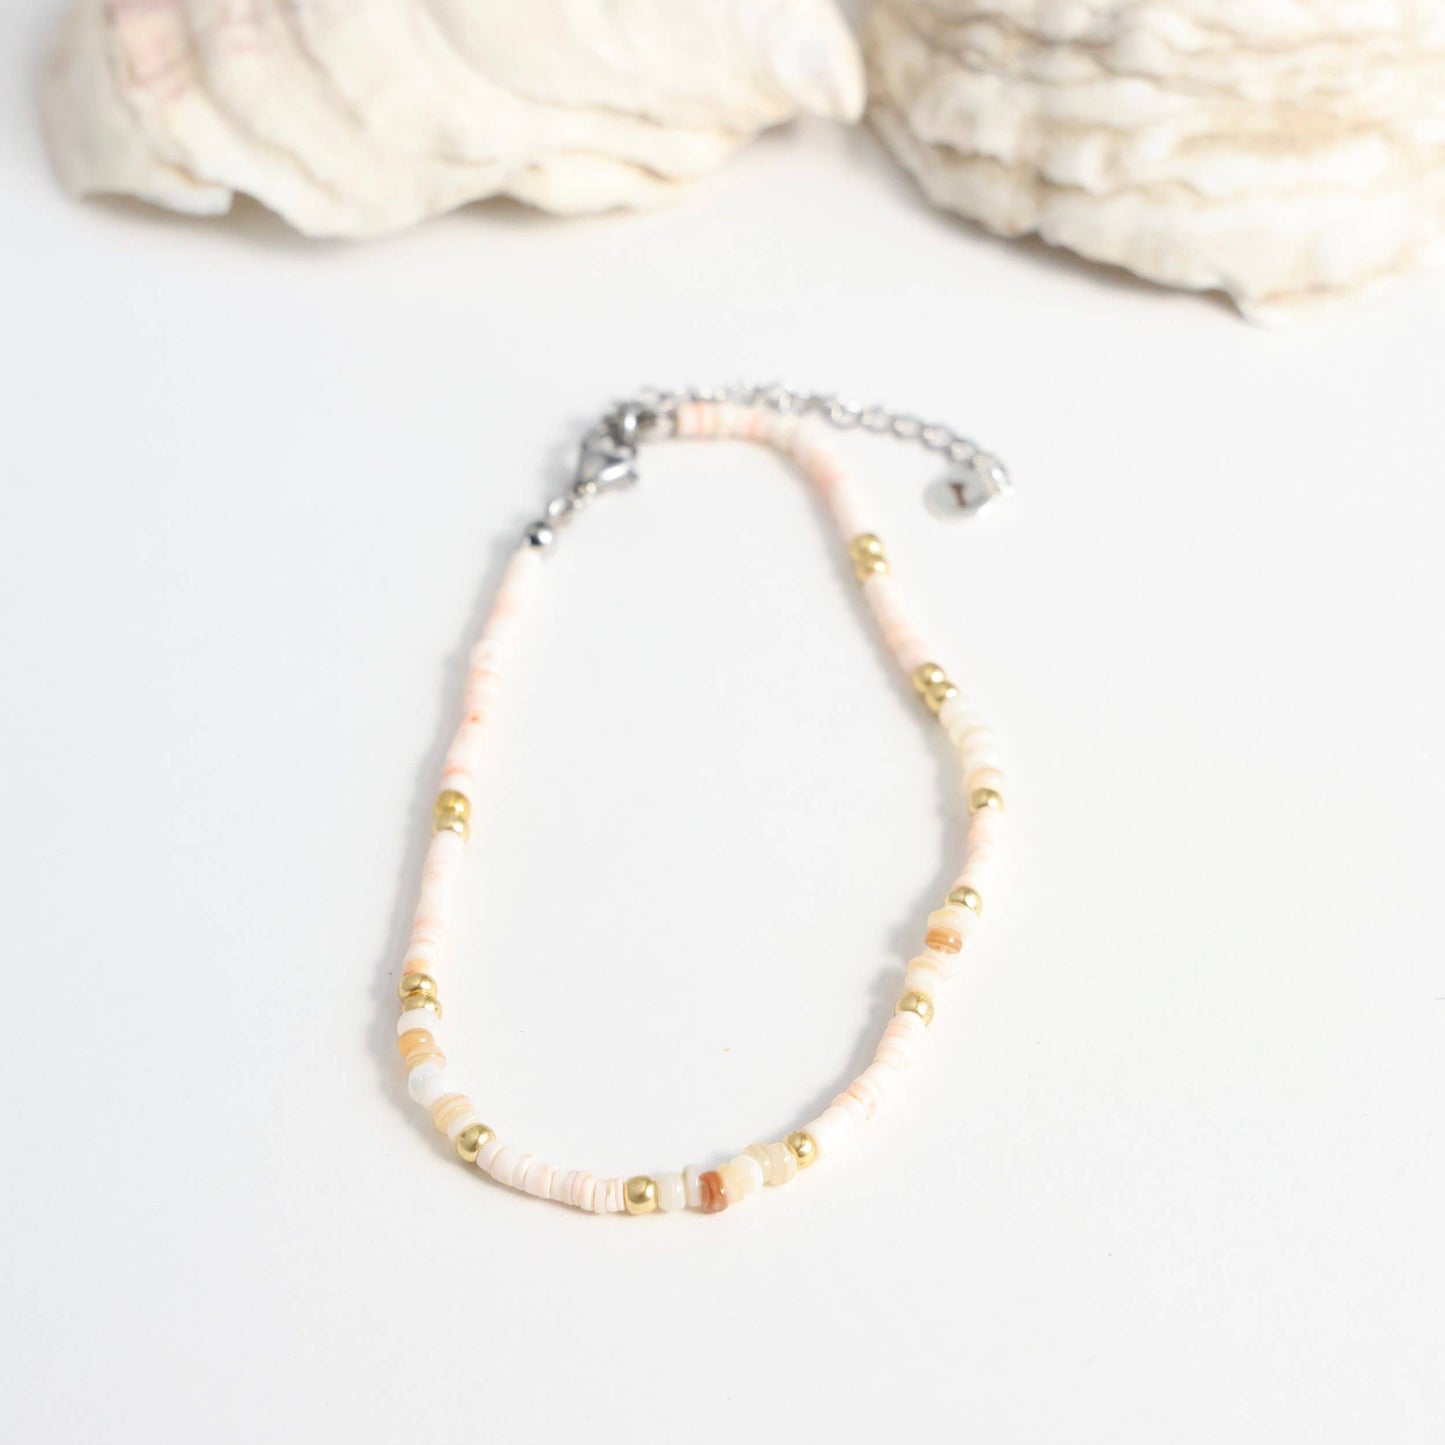 Puka Shell and Gold Craigville Beach Anklet